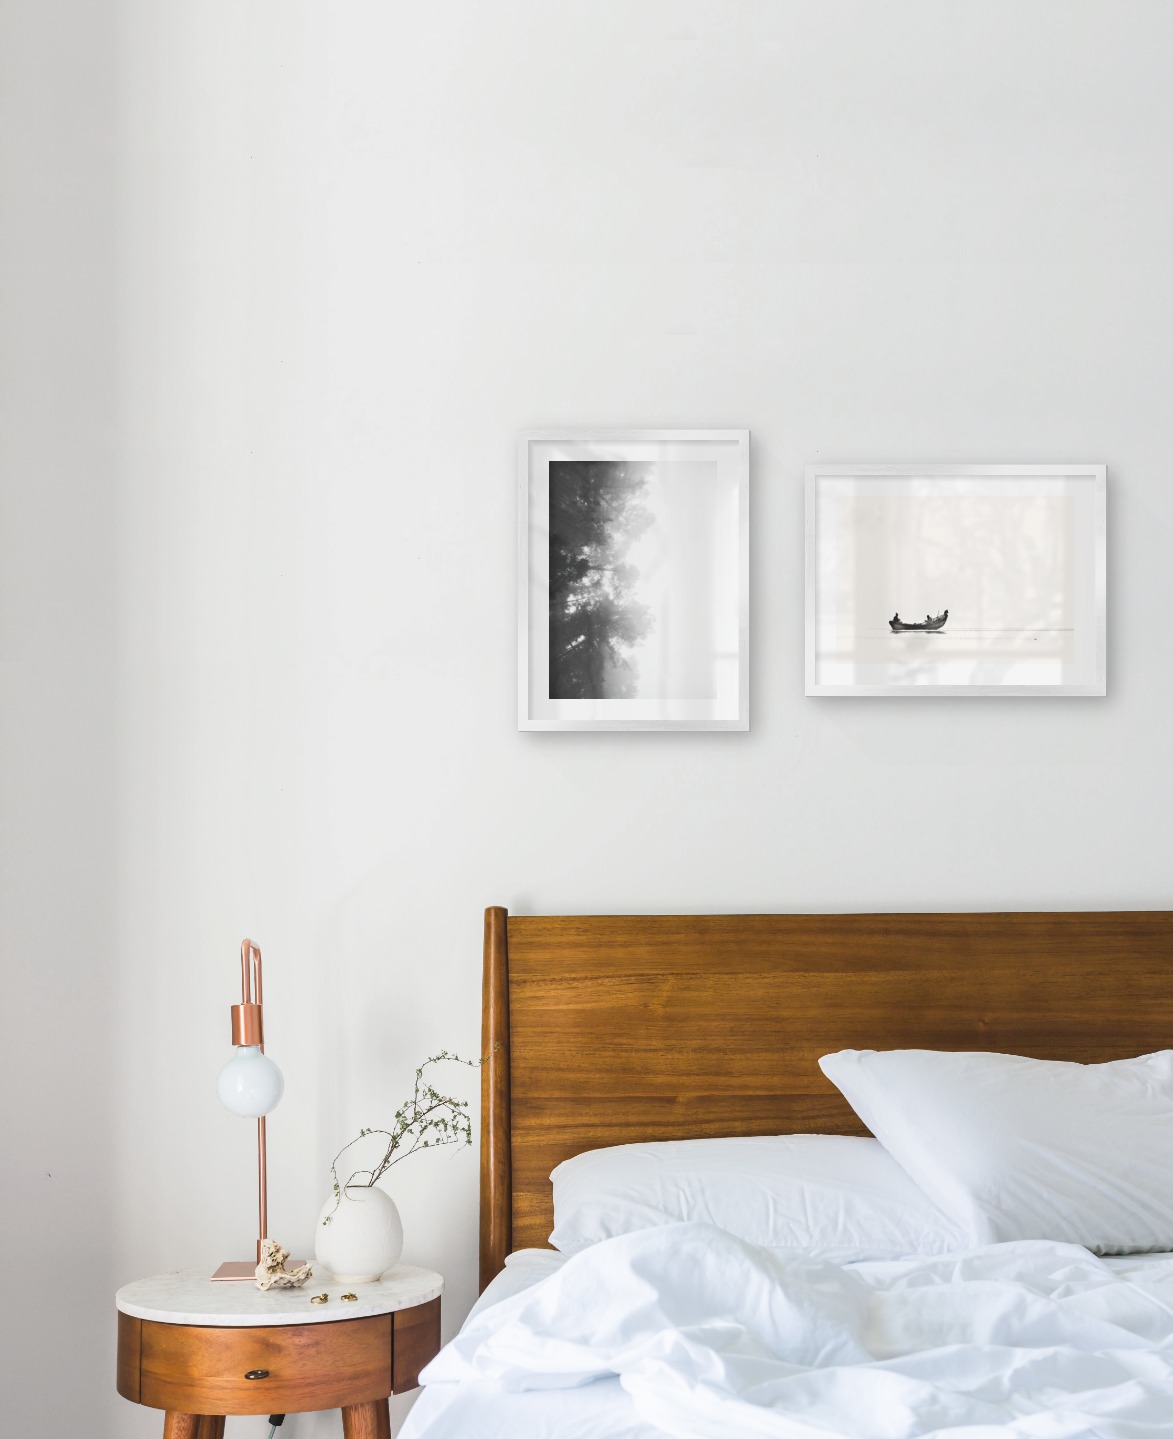 Gallery wall with picture frames in silver in sizes 30x40 with prints "Foggy wooden tops from the side" and "People in boat"